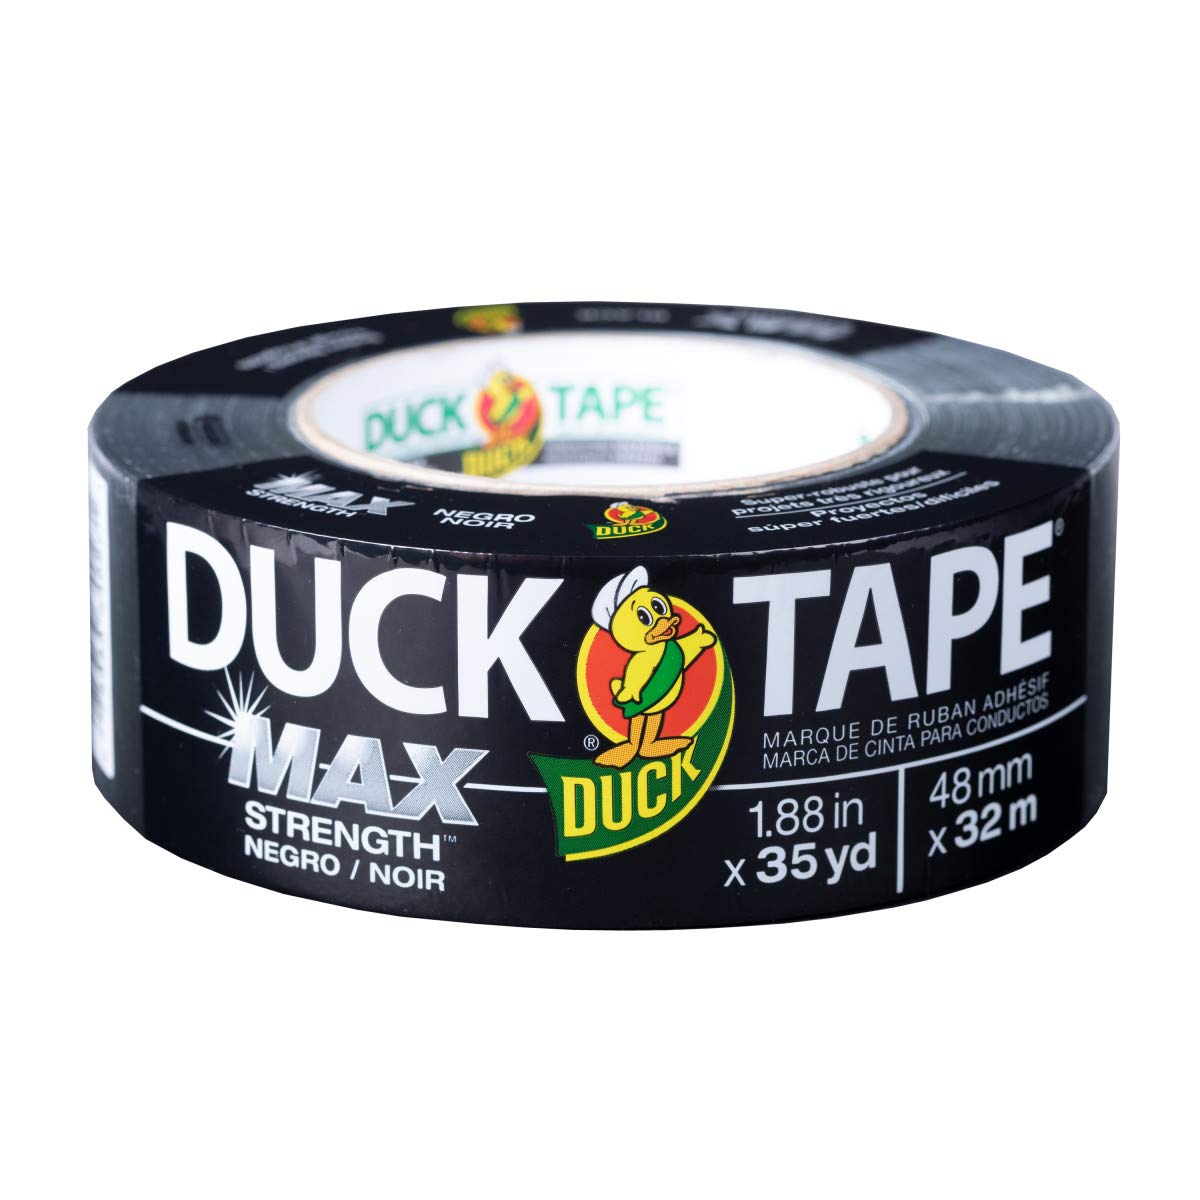 Duck Brand Max Strength Duct Tape, Silver, 1-Roll Pack, 1.88 Inch x 45 Yards, 240201